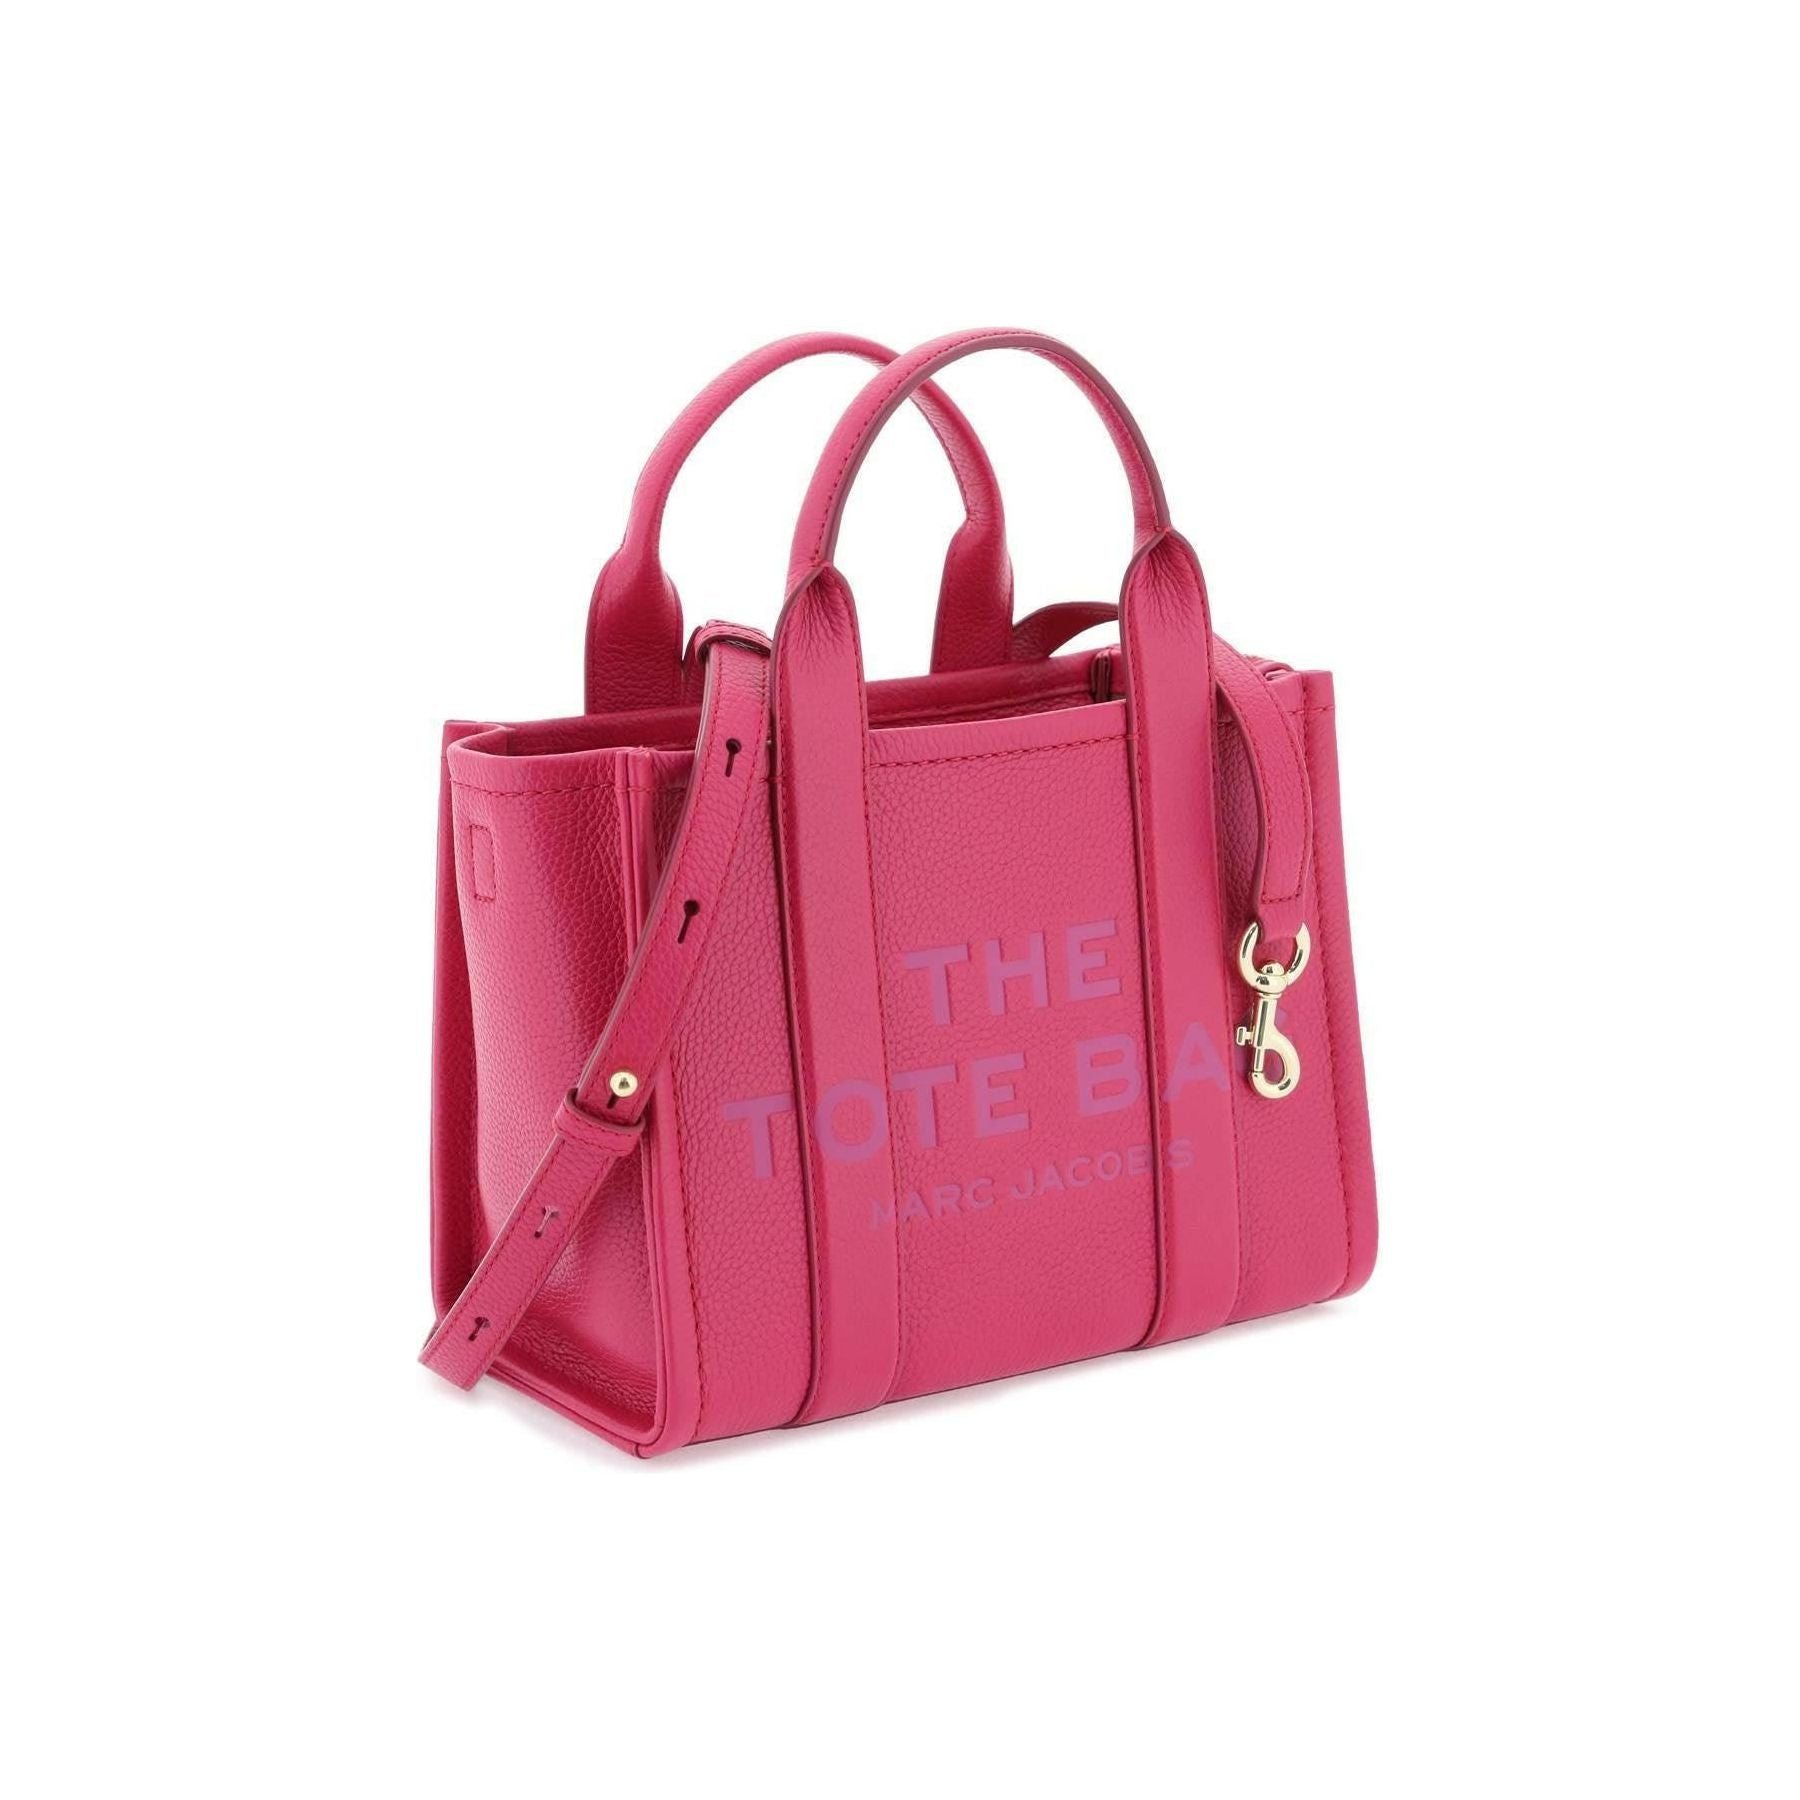 Lipstick Pink The Leather Small Tote Bag MARC JACOBS JOHN JULIA.